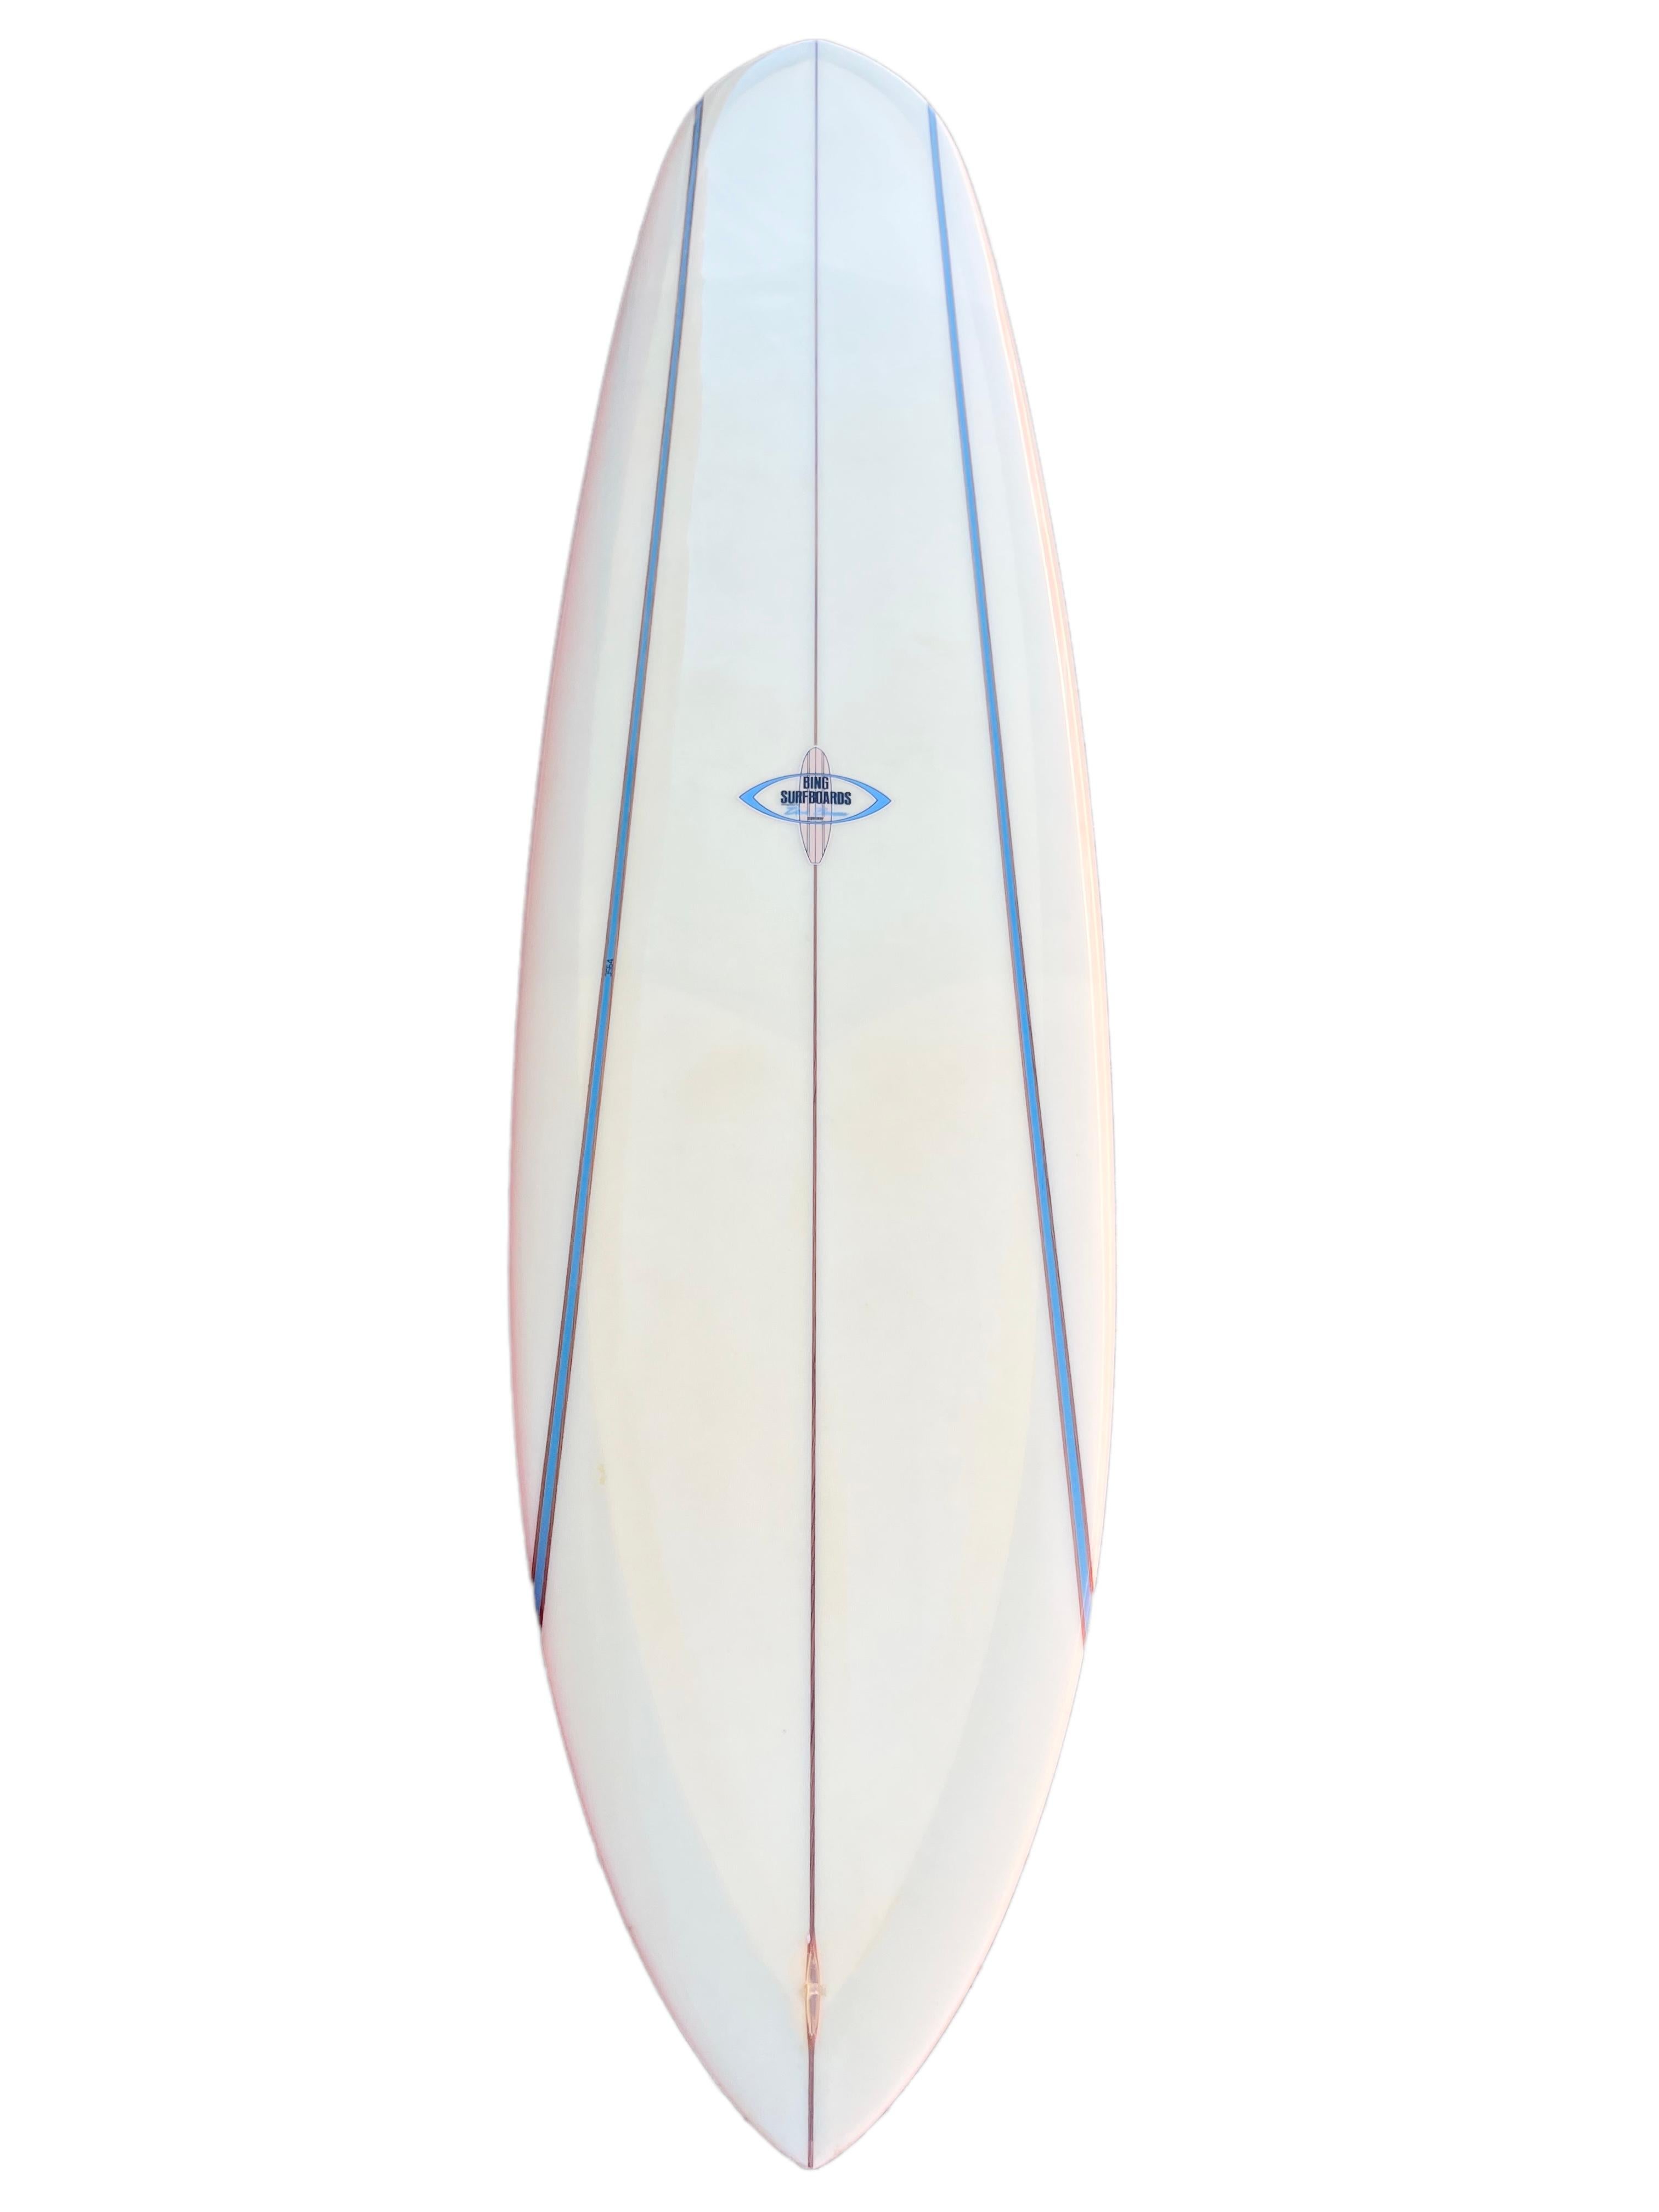 Late-1960s replica Bing Dick Brewer Pipeliner Big Wave Surfboard. Features a pintail shape design with 7 stringers including dual high-density blue foam stringers and matching glass-on on 60s single fin. Designed by the famous surfboard design